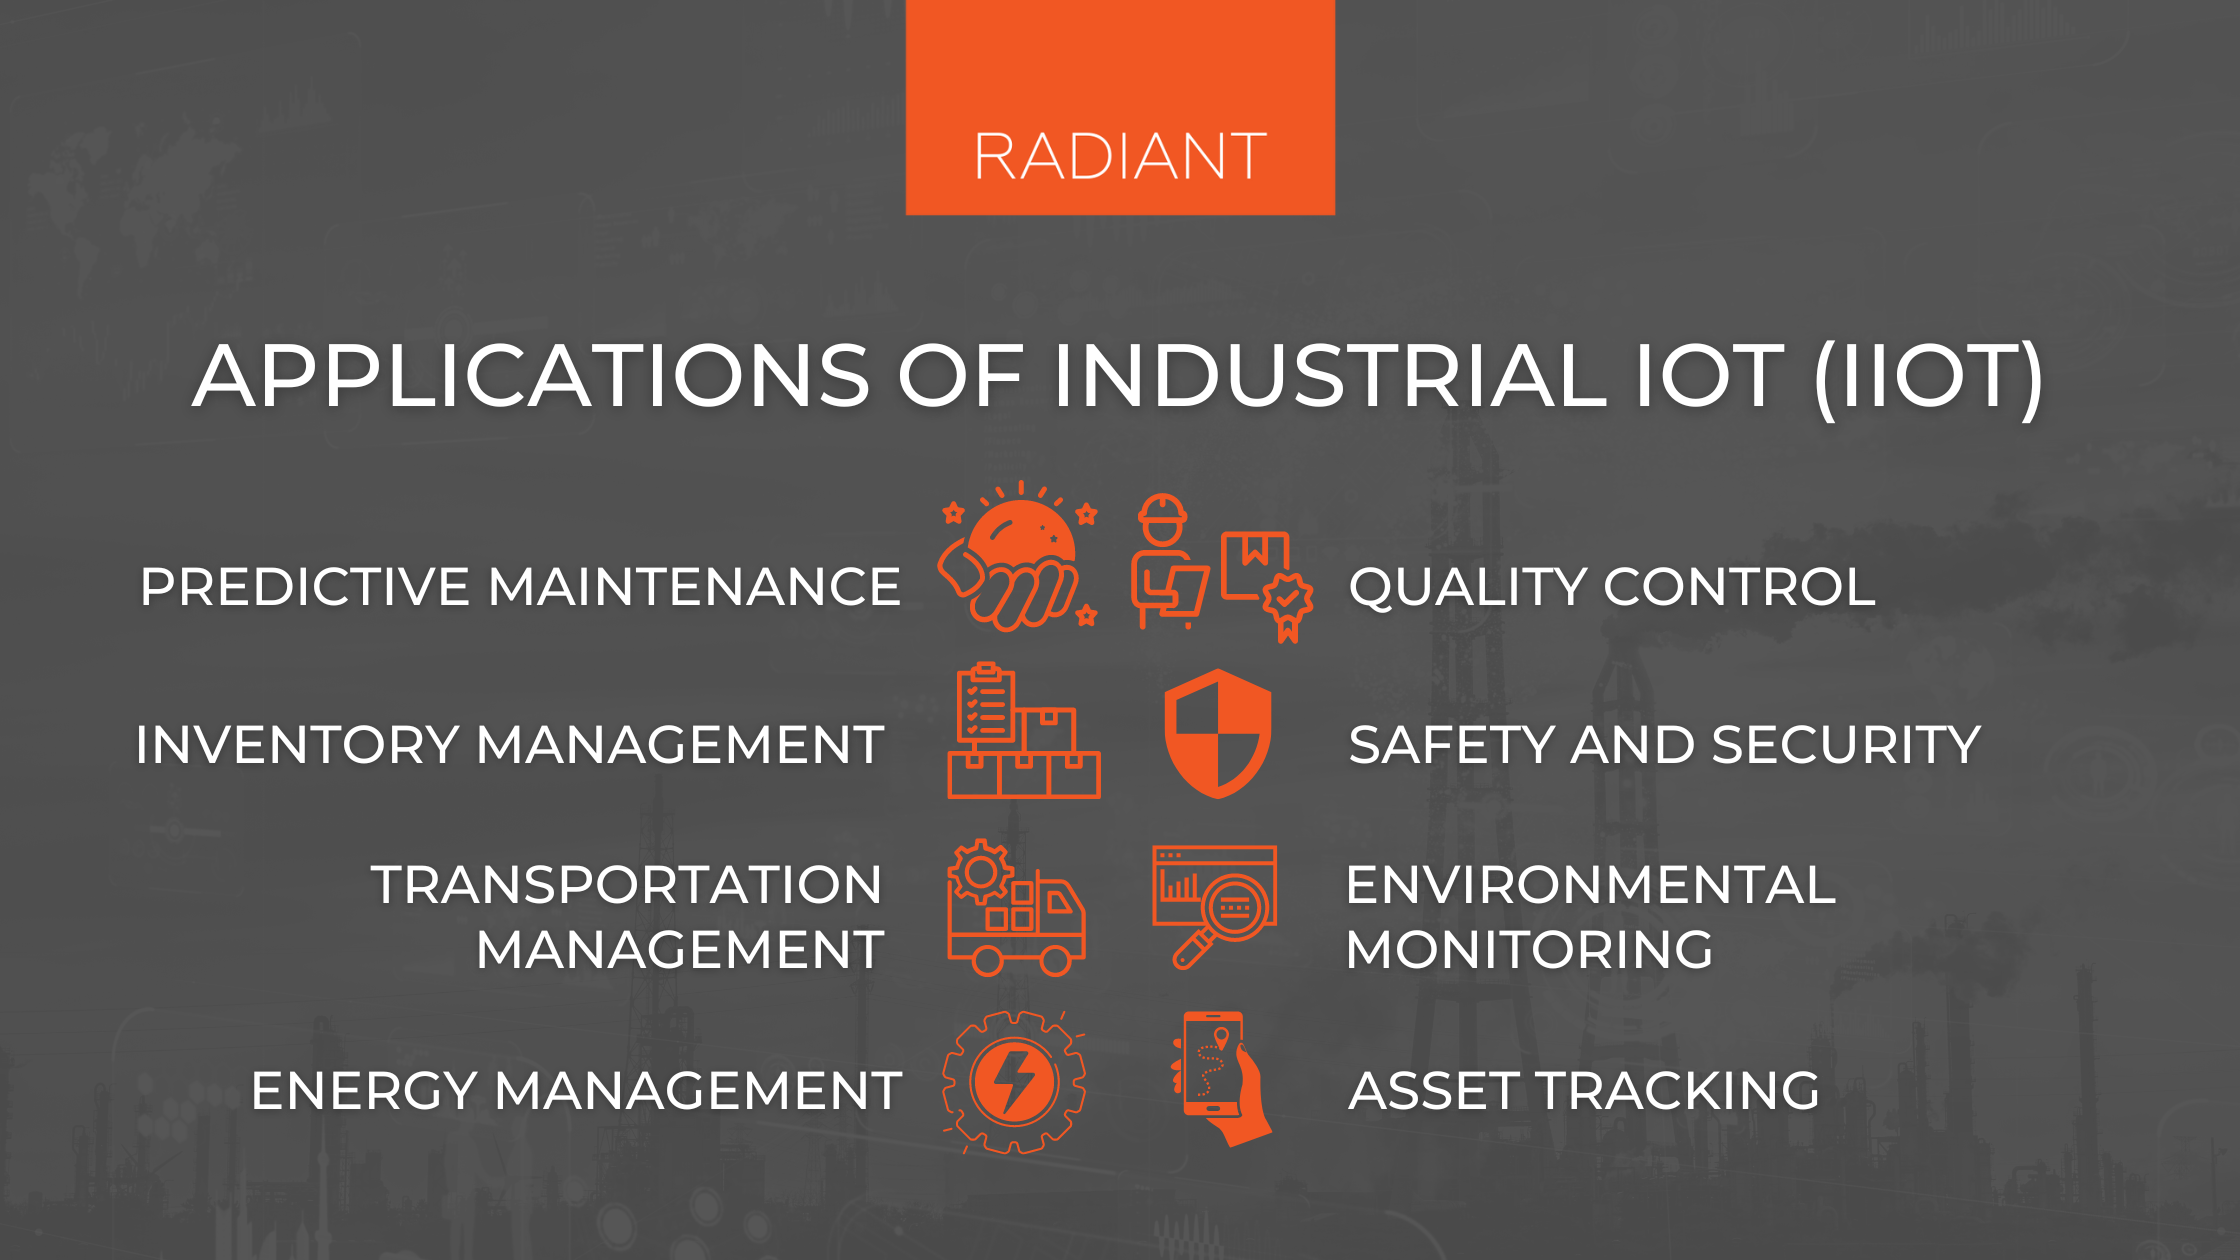 Industrial IoT - Industrial IoT Solutions - Industrial IoT Devices - IIoT - Industrial IoT Platforms - Industrial IoT Platform - Industrial IoT Sensors - Benefits Of Industrial IoT - What Is Industrial IoT - Smart Manufacturing - Industrial IoT Applications - IIoT Solutions - Industrial Internet Of Things IIoT - Industry IoT - IoT Industrial